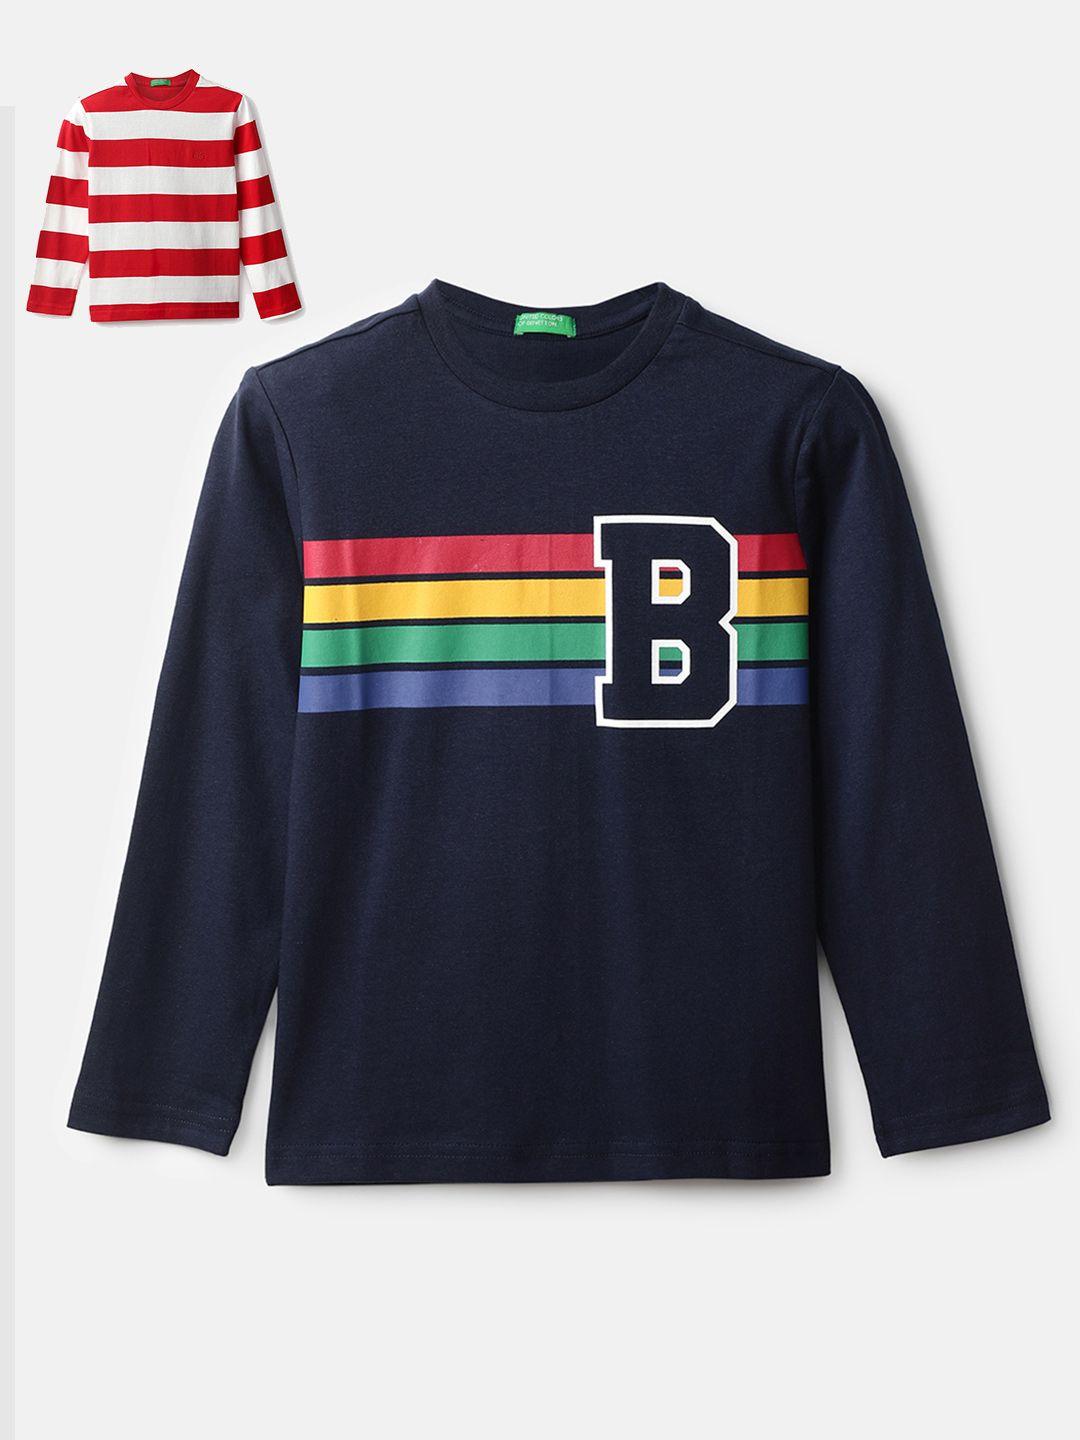 united colors of benetton boys black & red 2 striped cotton t-shirt